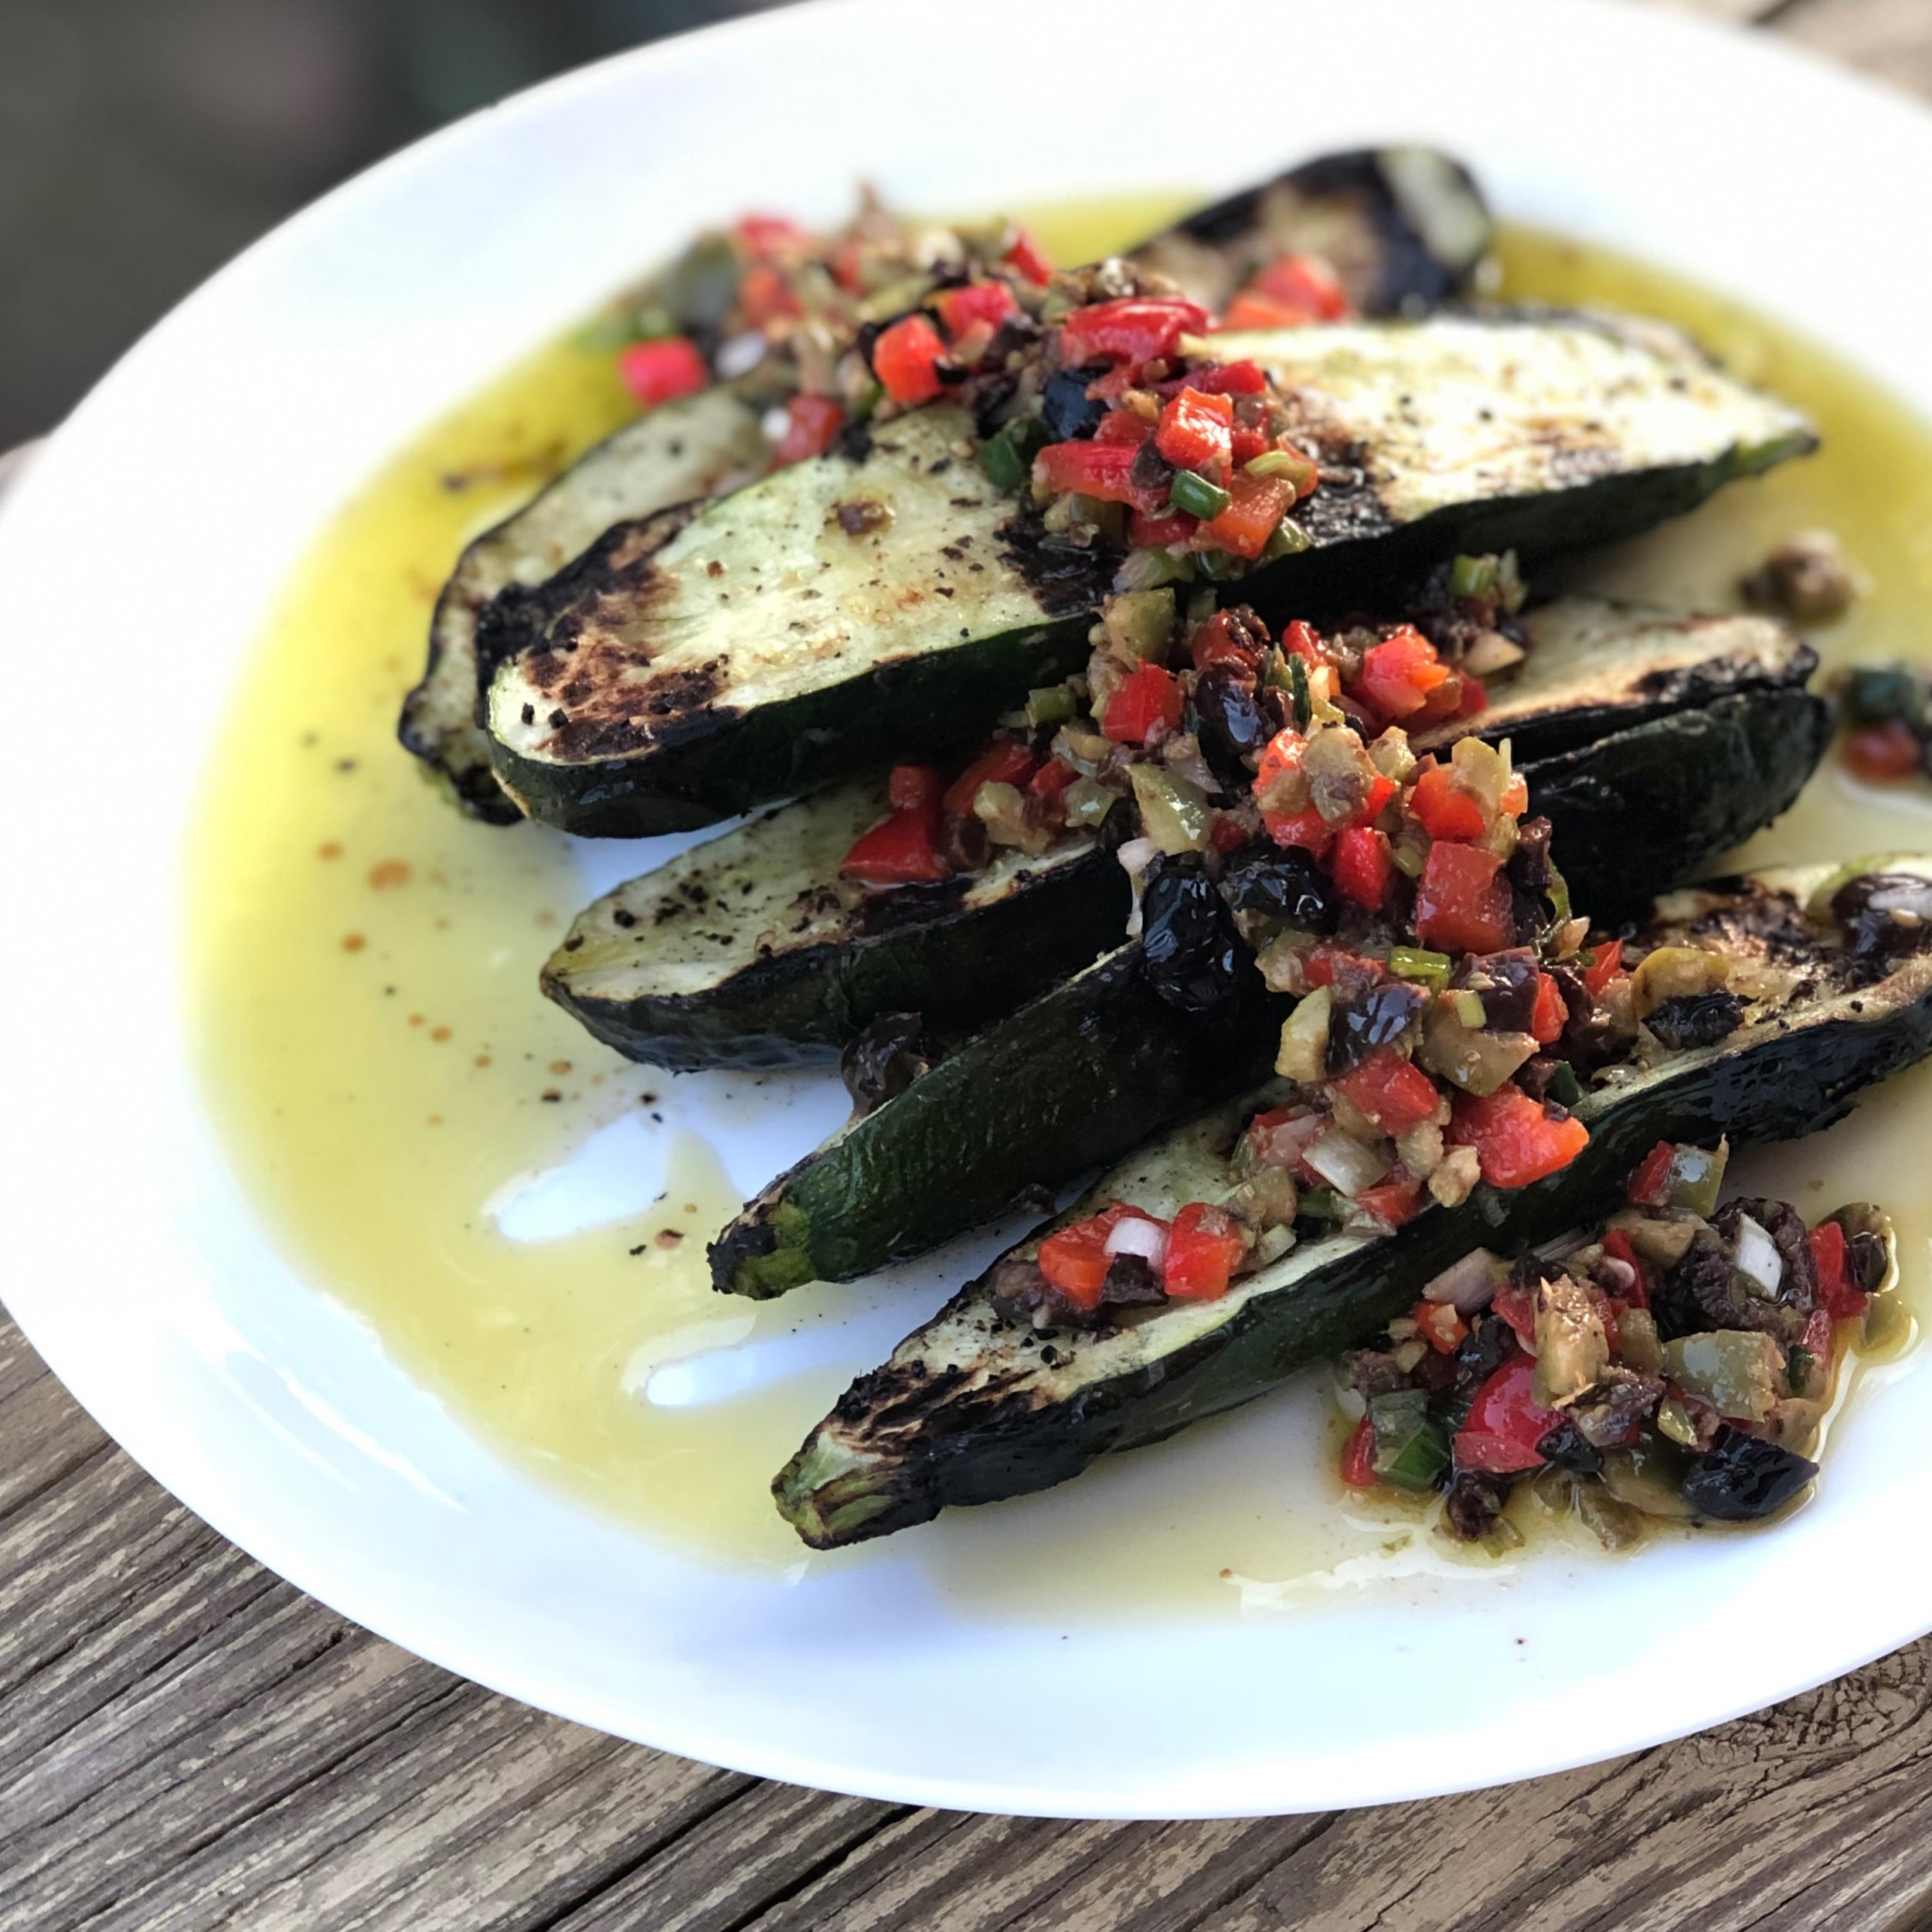  Grilled Zucchini with Olive & Caper Relish   